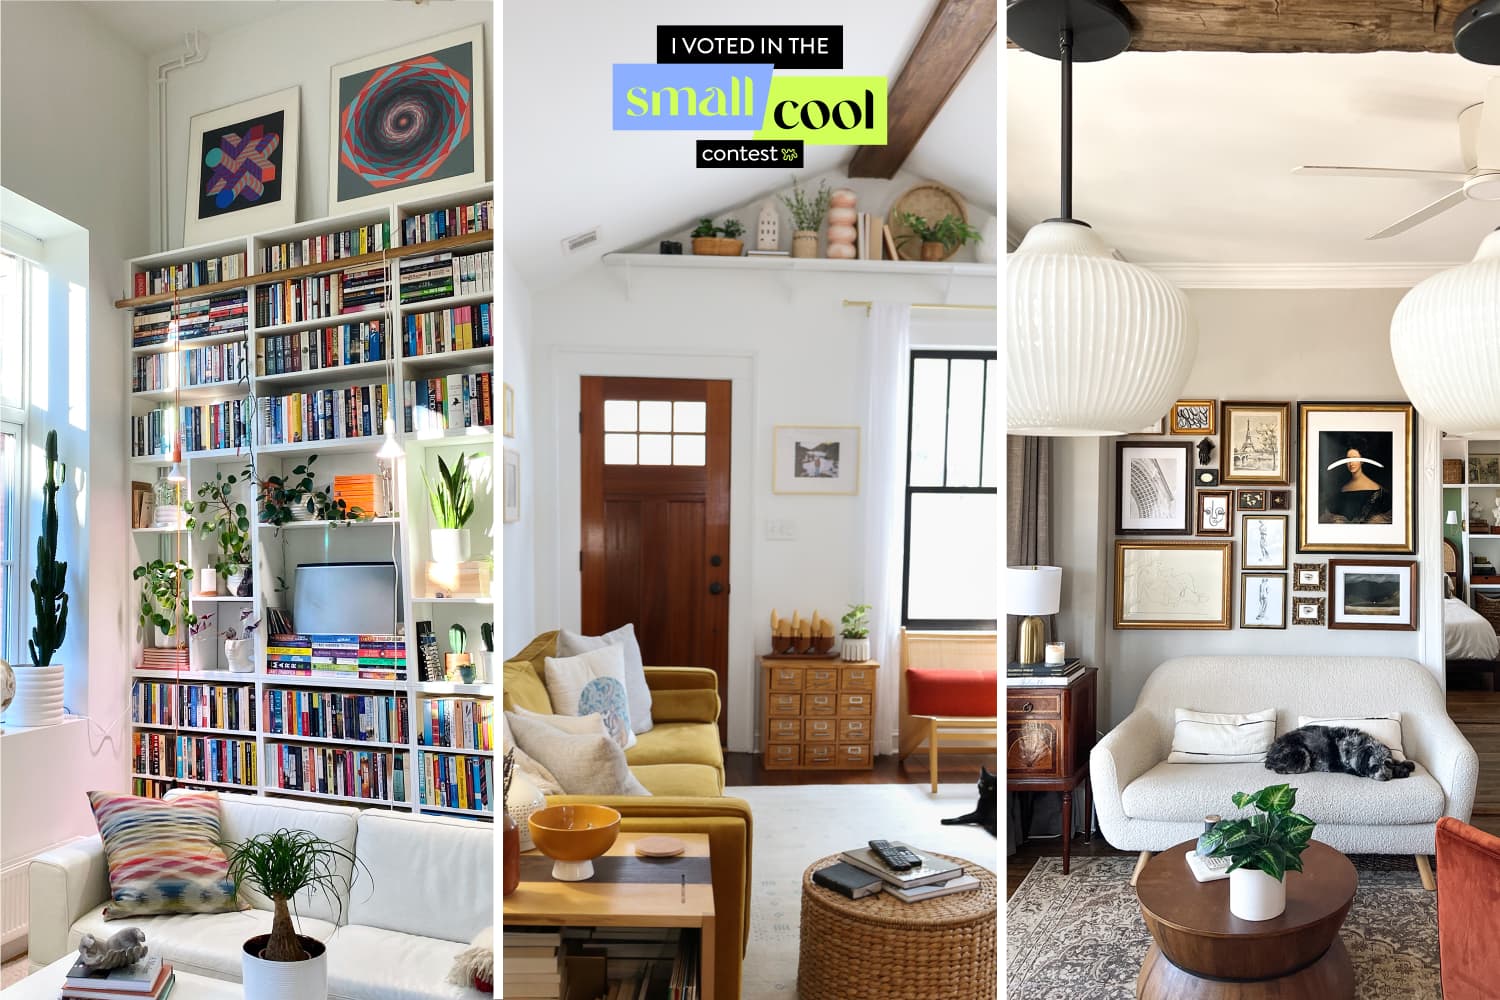 Meet the Winner of the Small/Cool 2022 Contest | Apartment Therapy